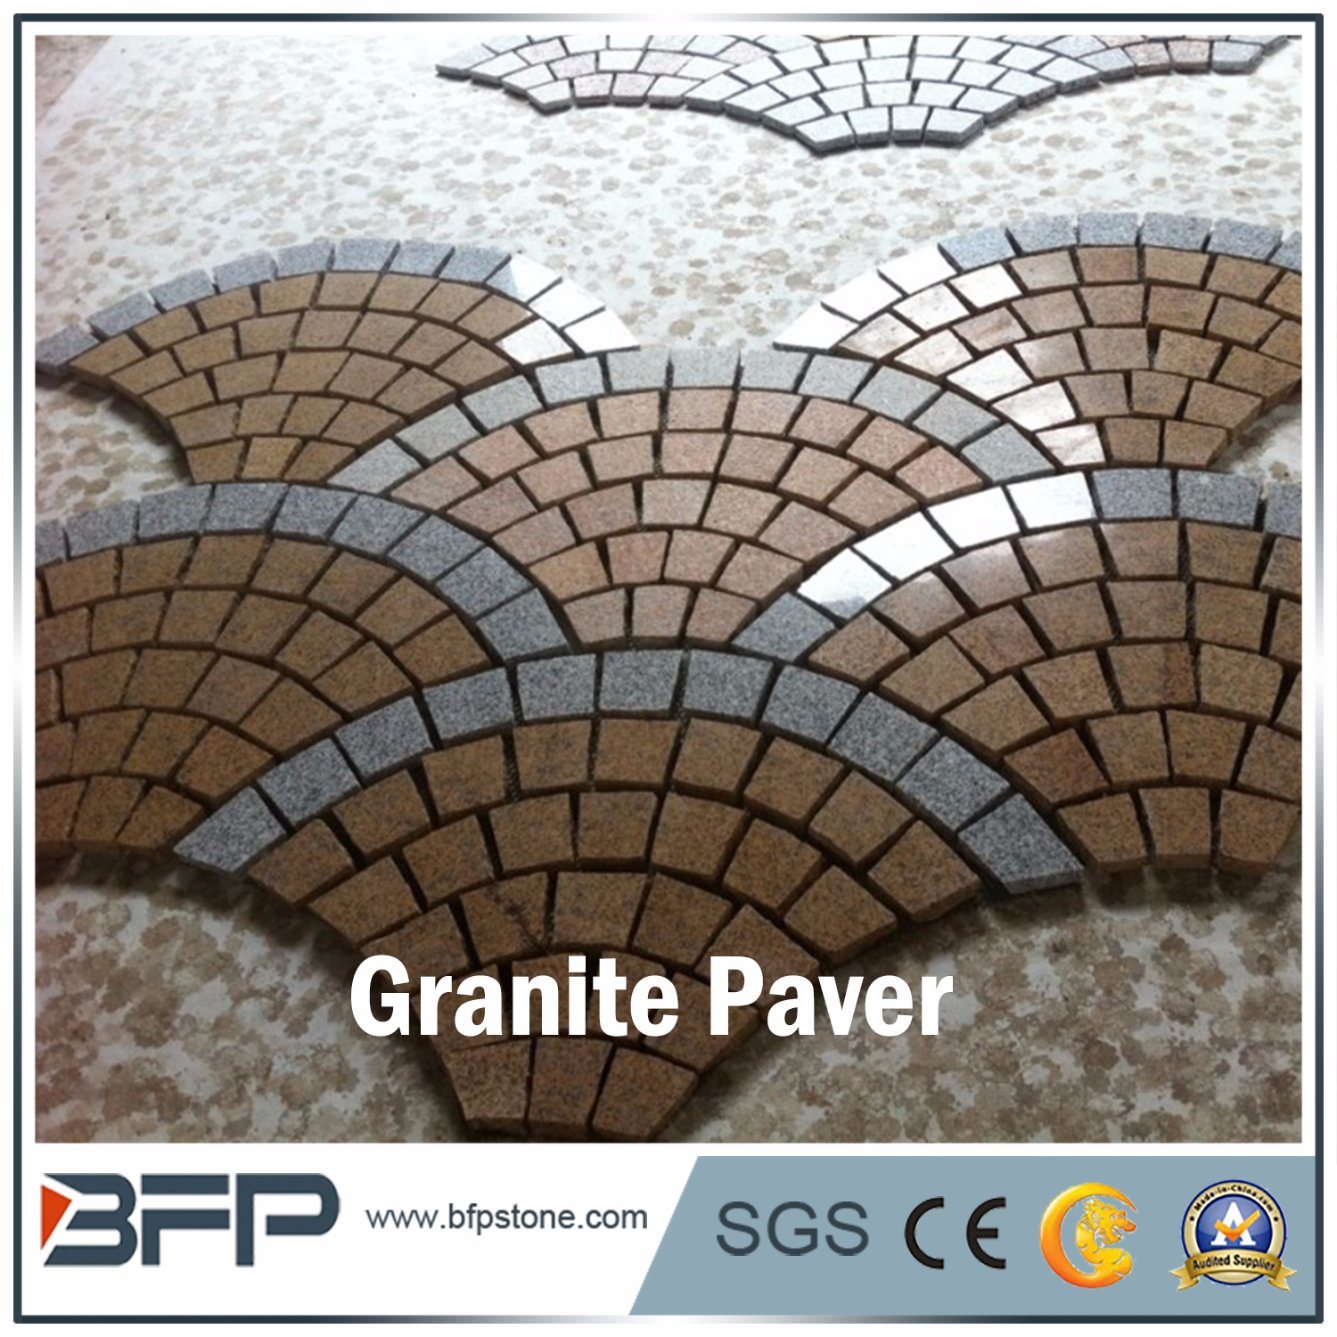 Rusty and Black Granite Meshed Cobblestone in Driving Way Paver